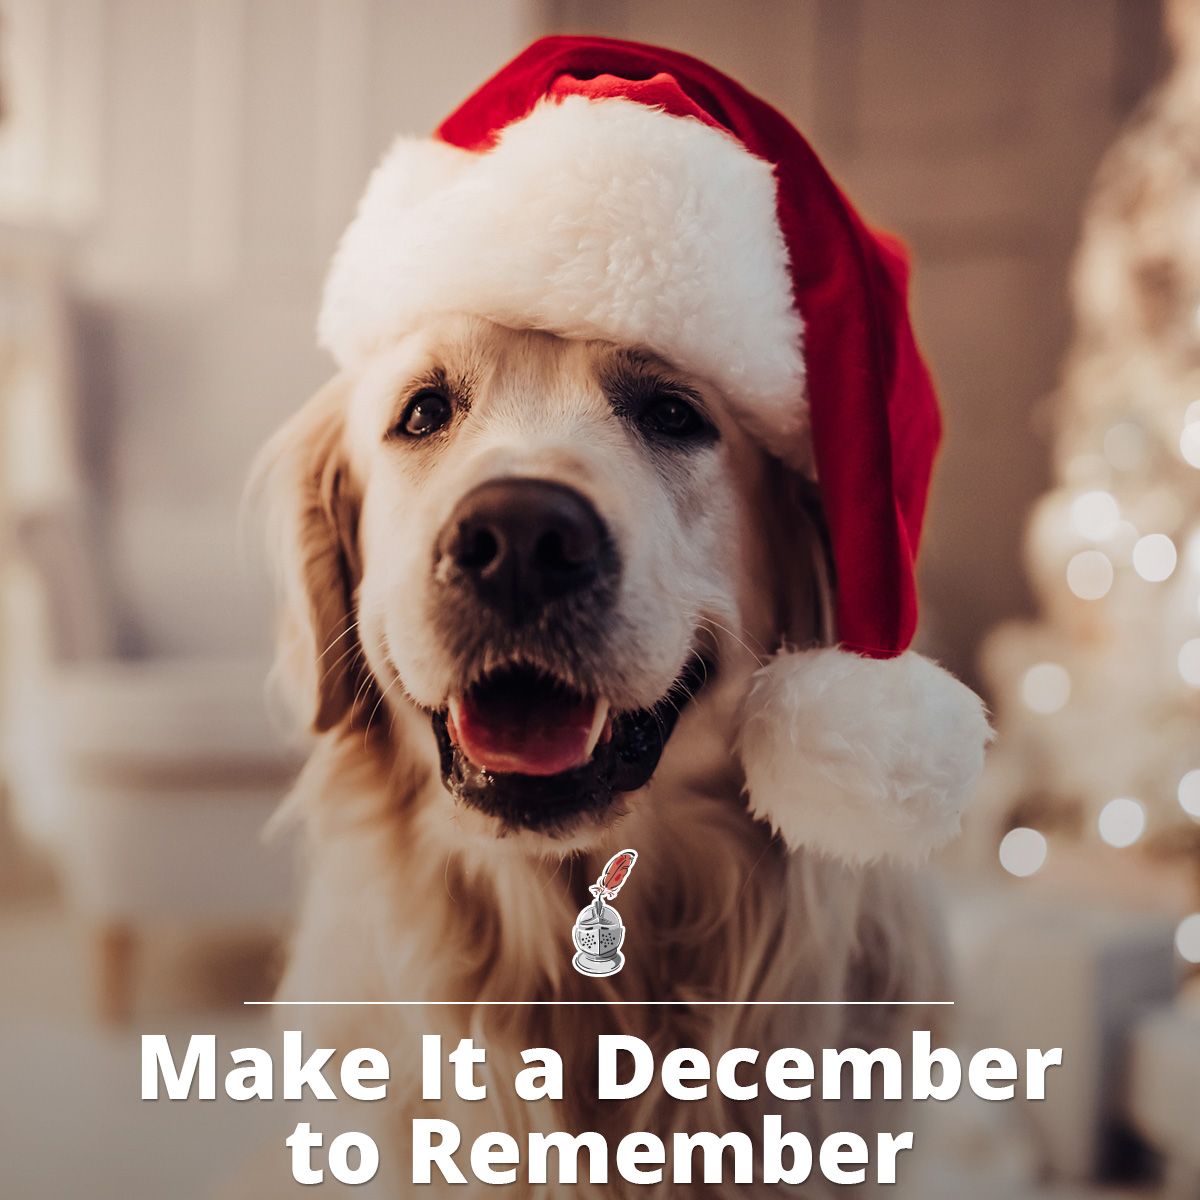 Make It a December to Remember